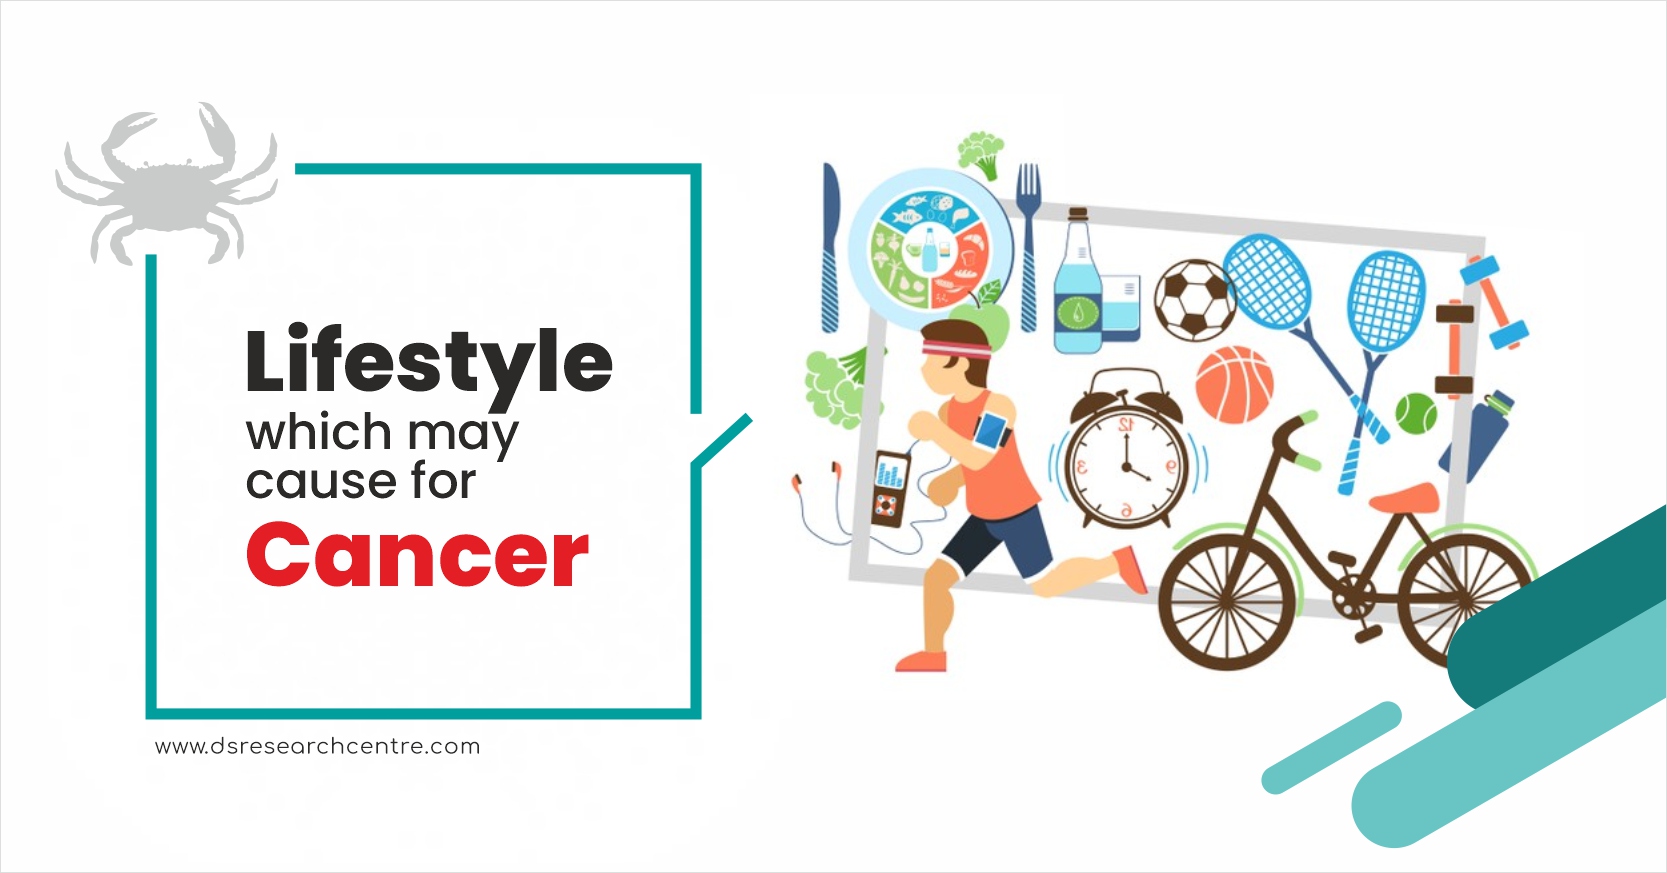 Lifestyle: Which may cause Cancer